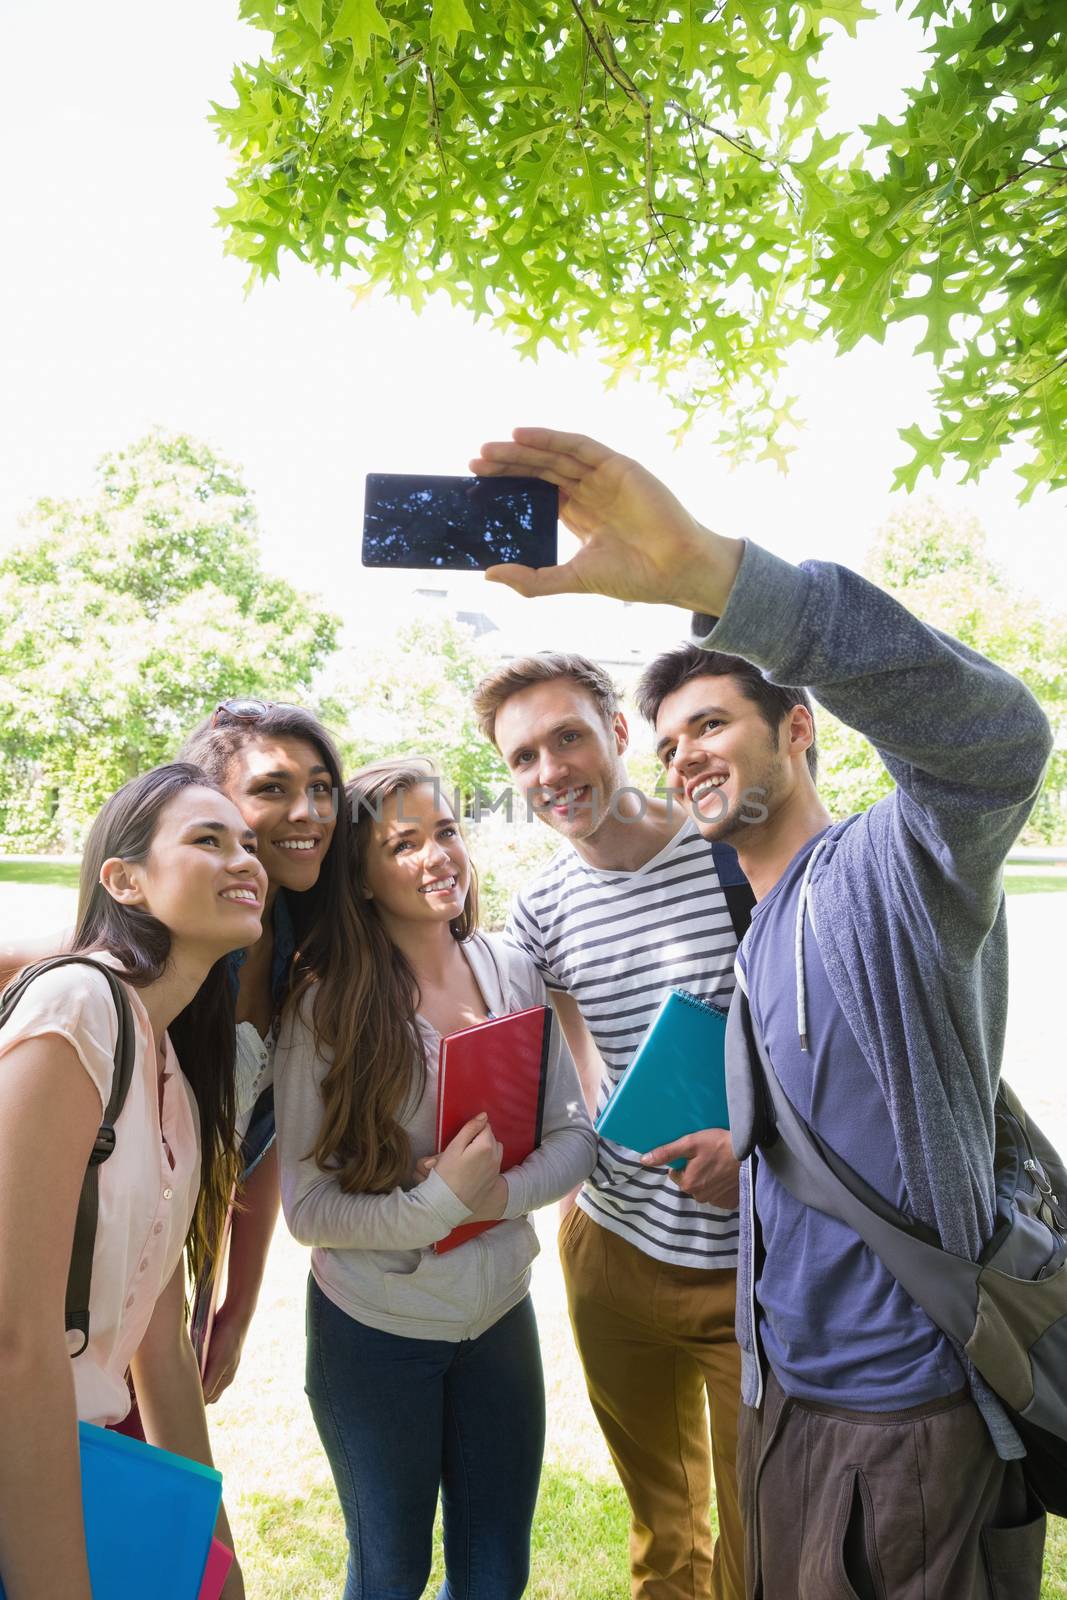 Happy students taking a selfie outside on campus by Wavebreakmedia